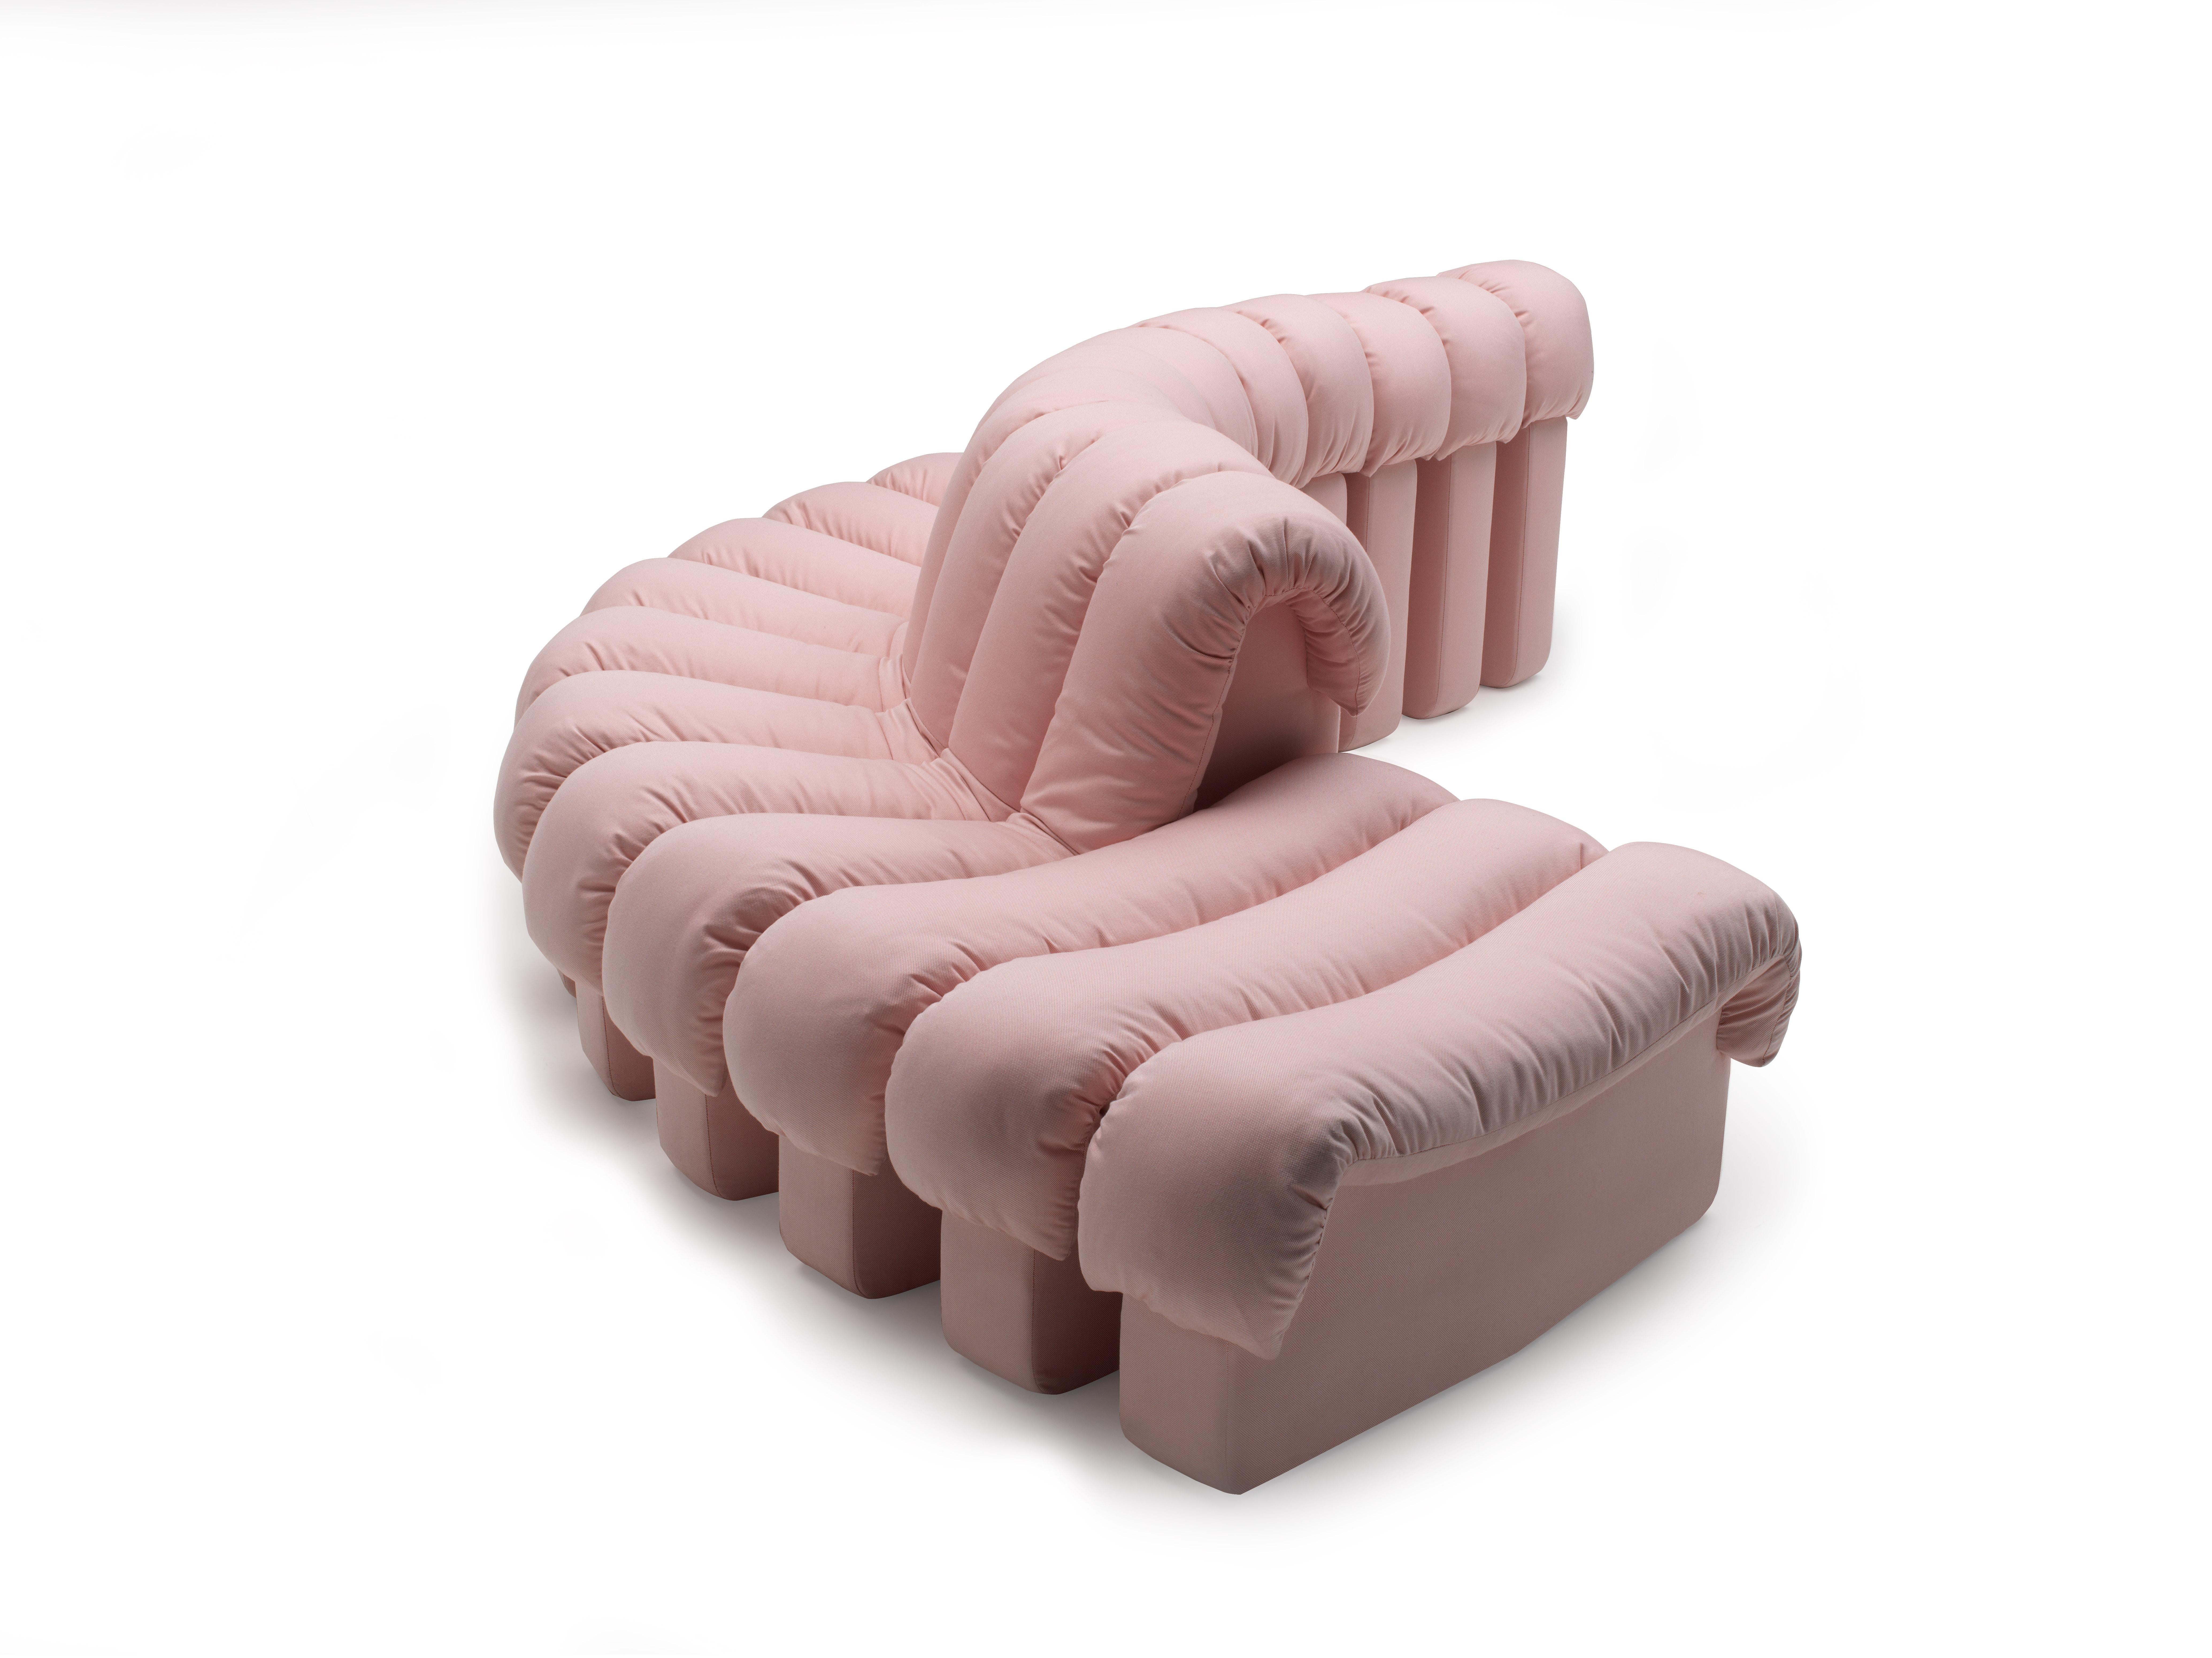 De Sede DS 600 'Snake' Sectional Sofa with 14 Elements in High Quality Full-grain Pink Nappa Leather, Zwitserland. New, current production. 

The De Sede DS 600 alias 'Tatzelwurm' or 'Snake' is arguably the most famous sofa in the world. The